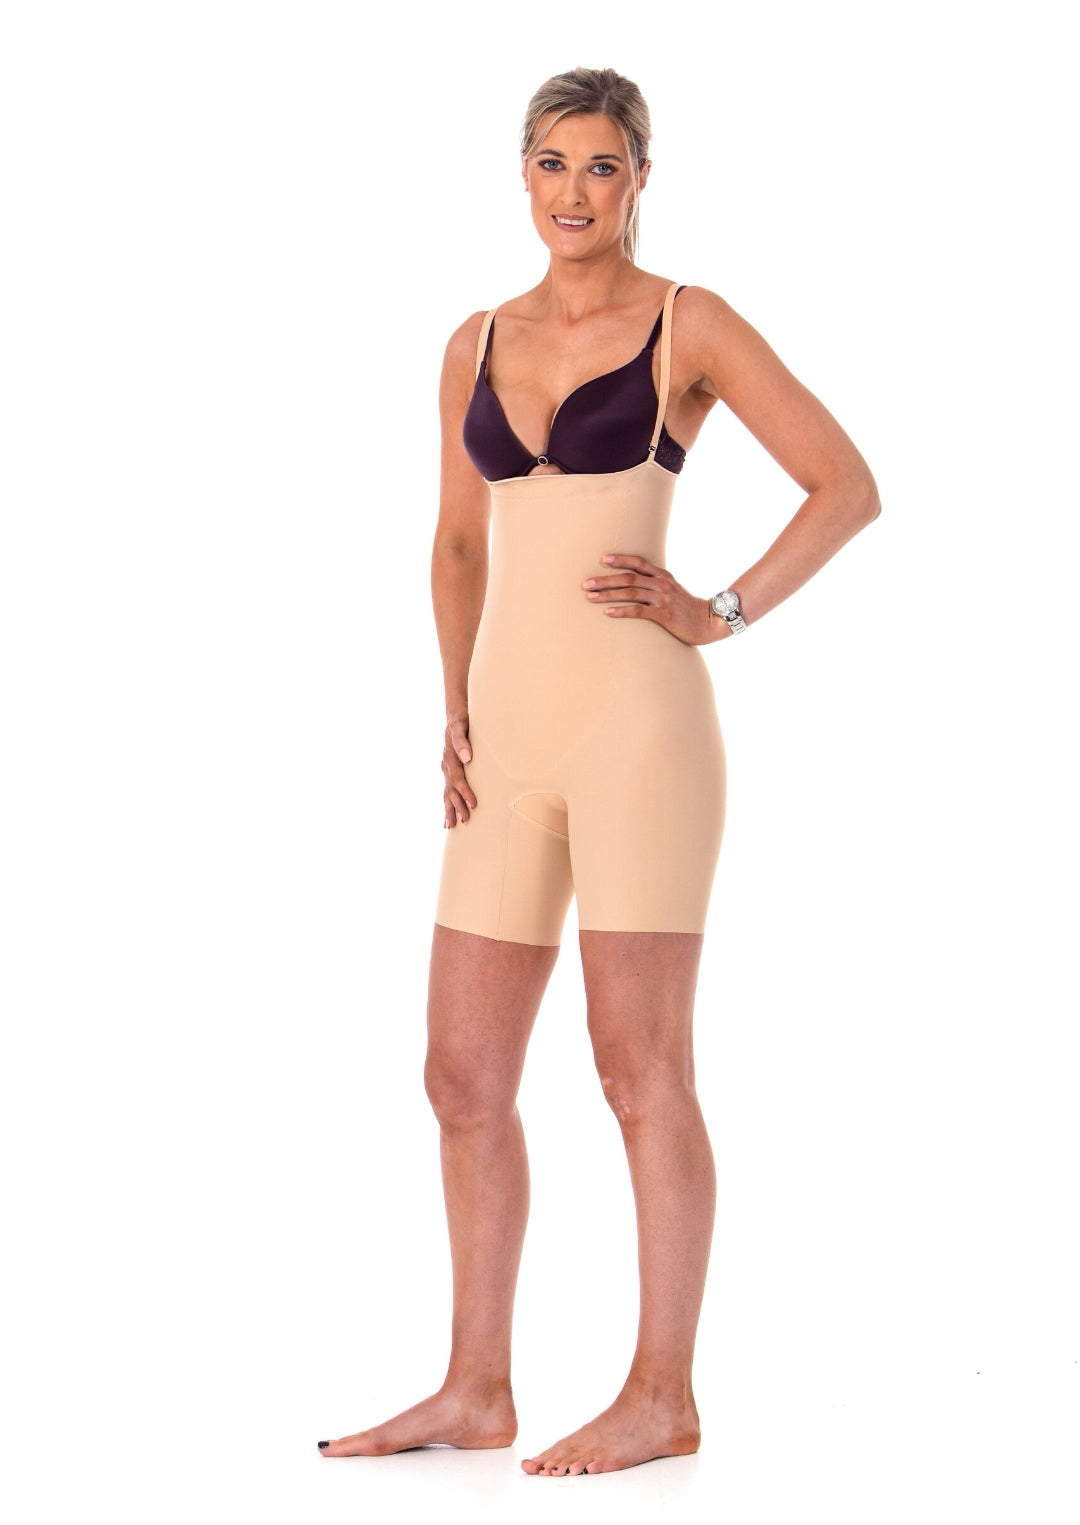 ATIR Shapewear - The ATIR Bodysuit -Before and after at the Today